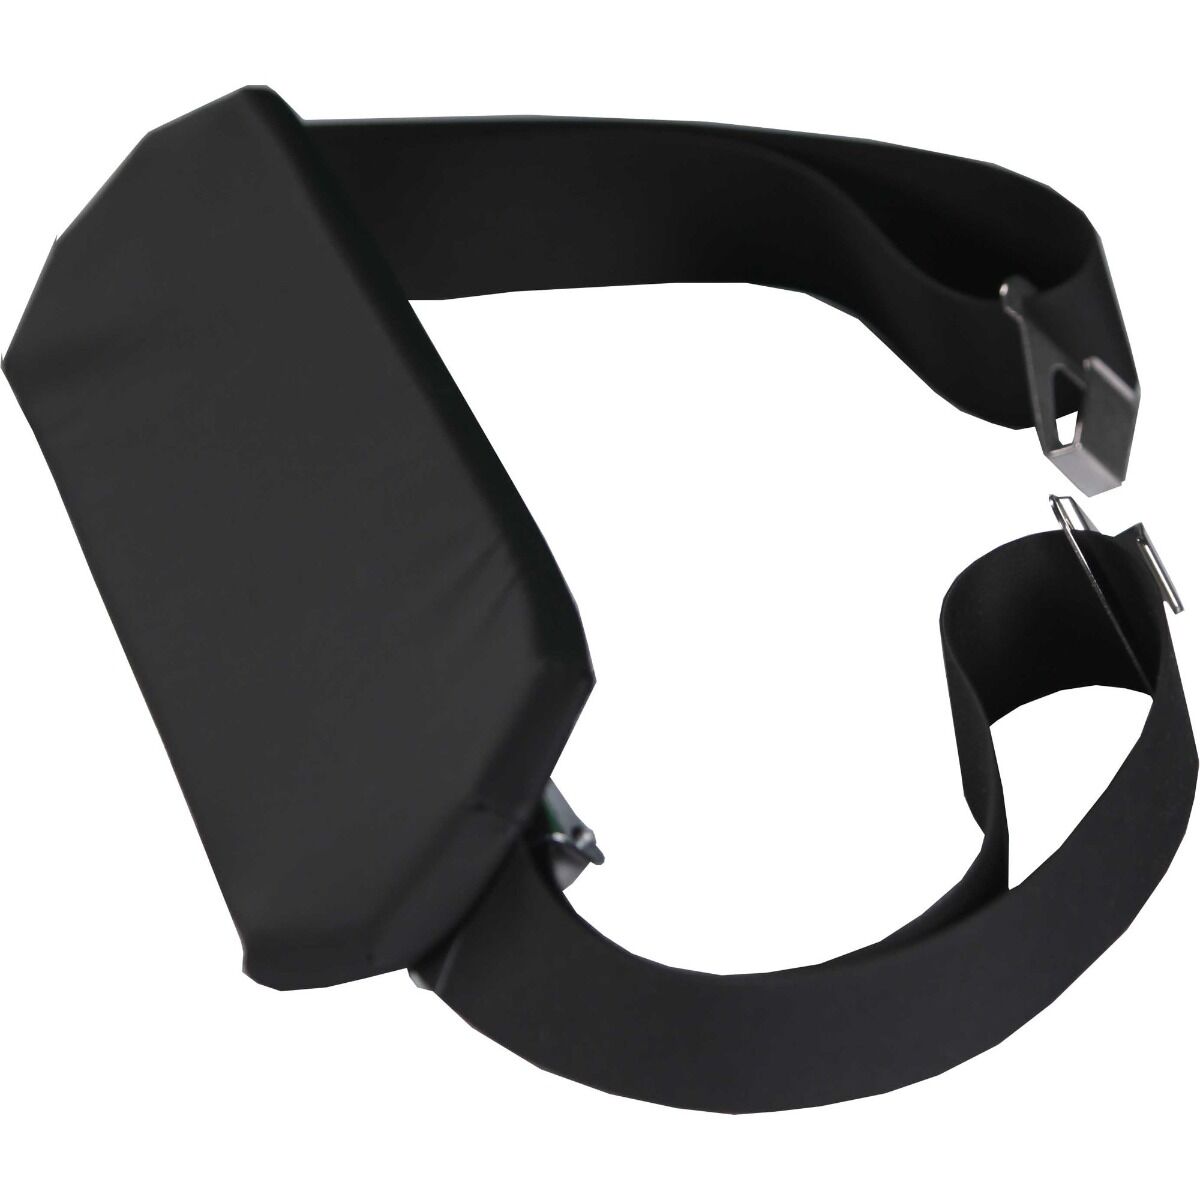 Padded Rubber Patient Restraint Strap with Buckles and Hooks